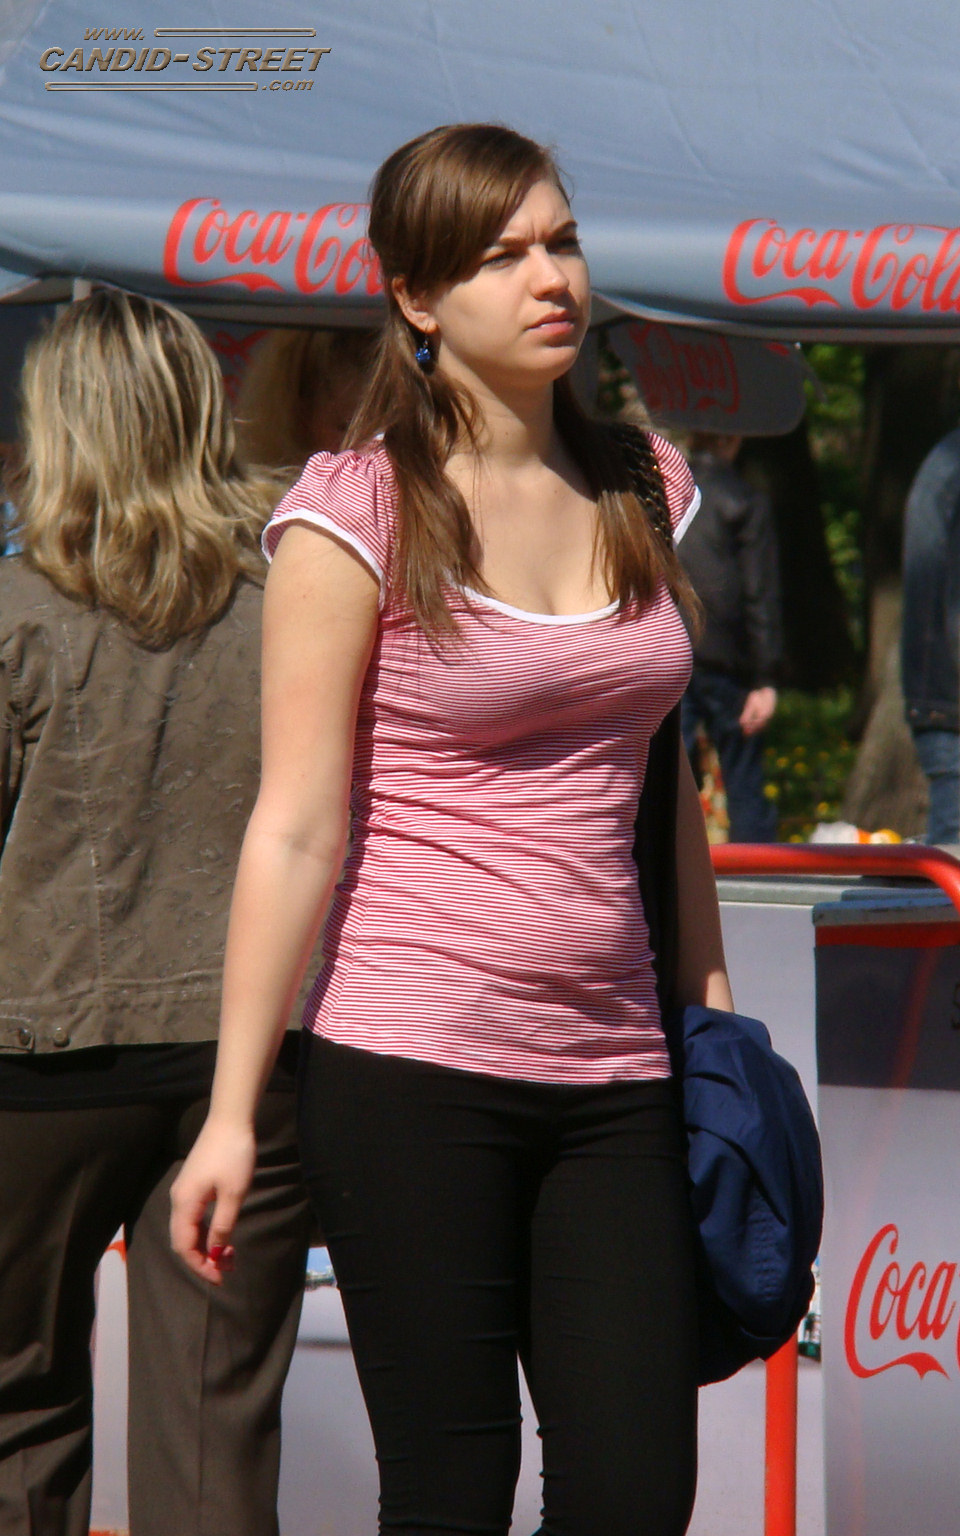 Busty girls candid shots - 27-dsc07101 from Candid Street